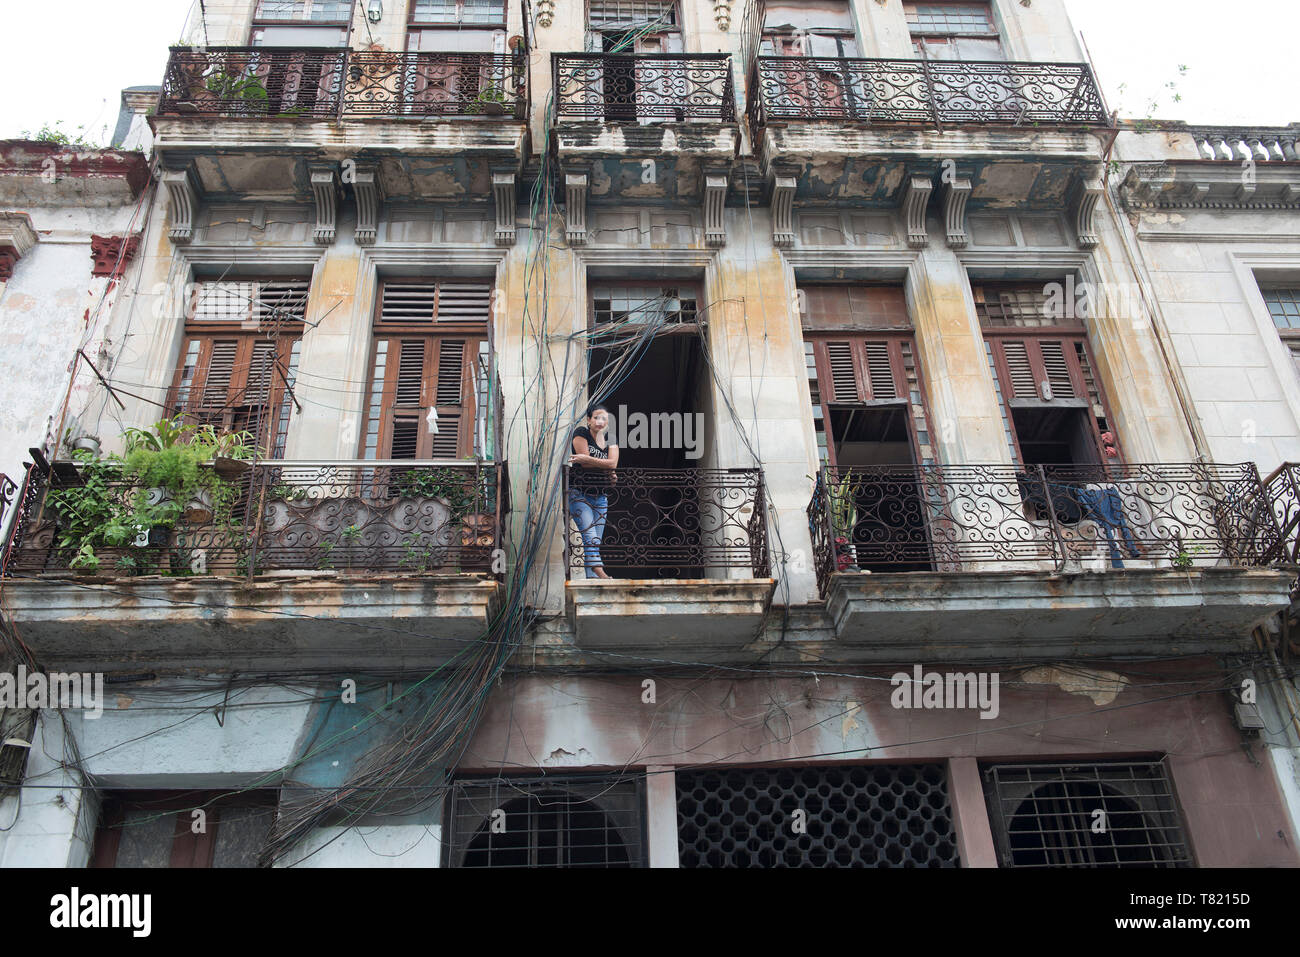 Havana the capital of Cuba, a city with a bit of dilapidation as US embargo bites, buildings and city scapes of crumbling buildings Stock Photo